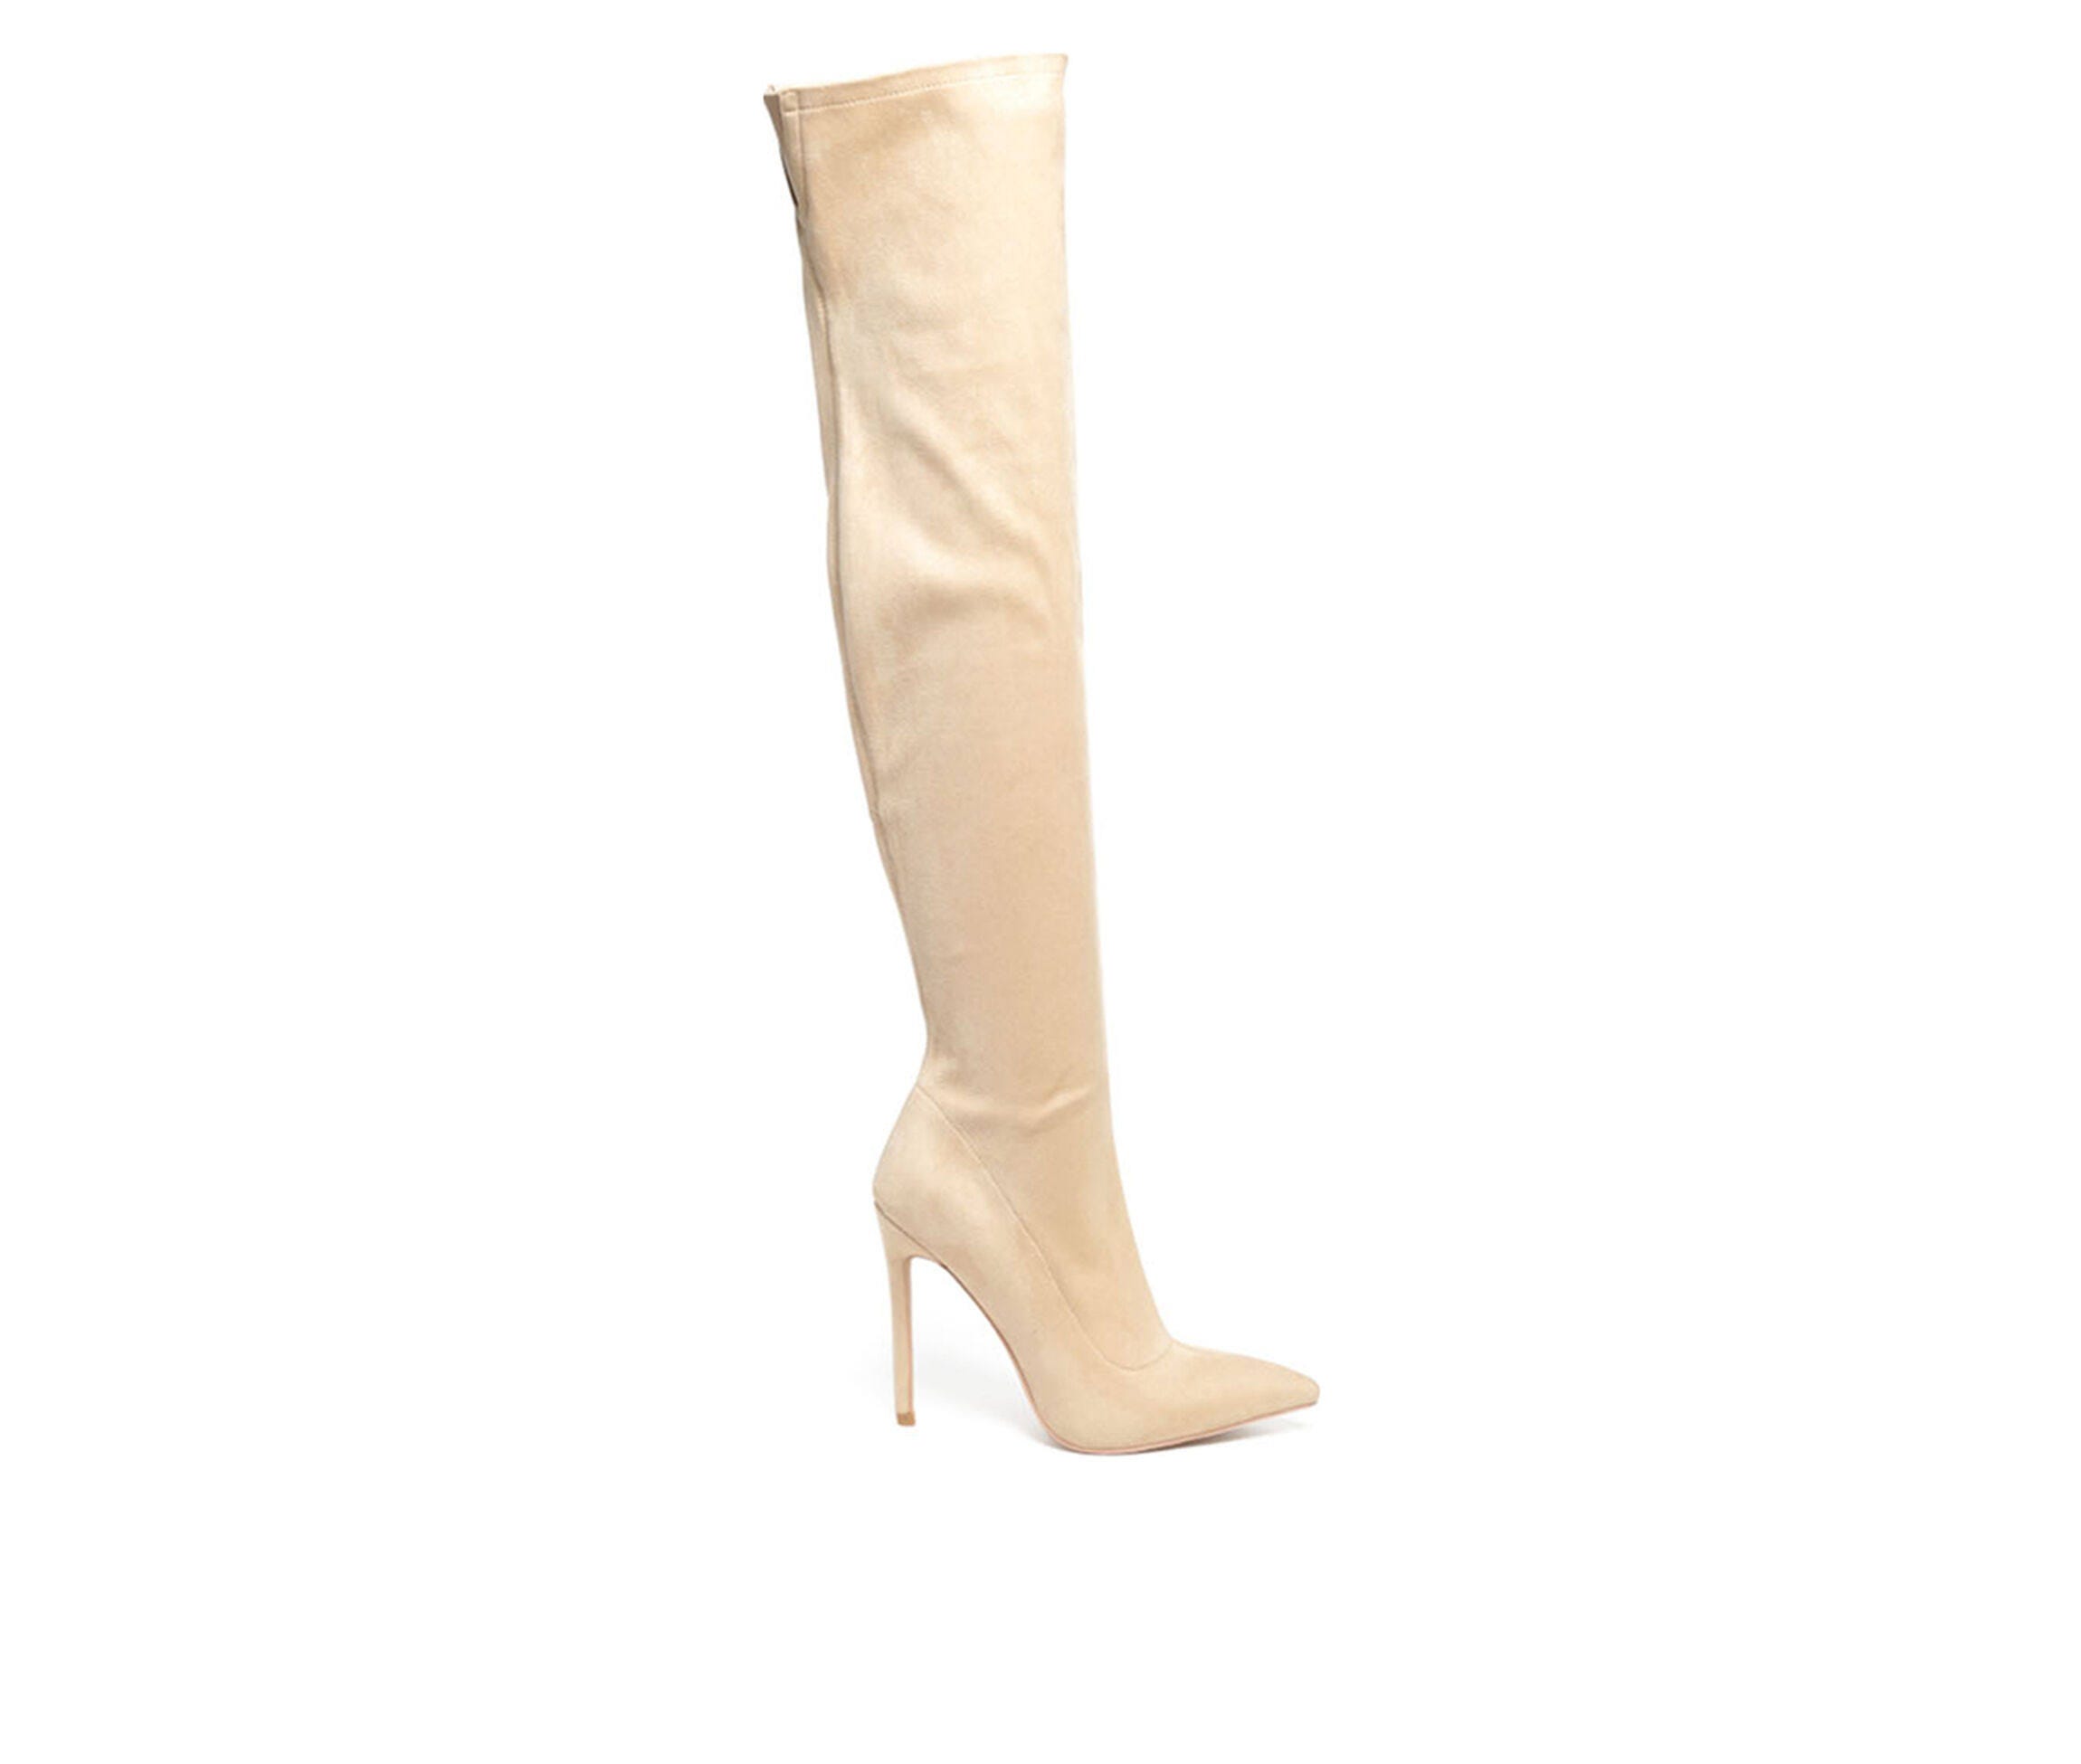 Stiletto Over the Knee Boots - Faux Suede & Rubber | Image